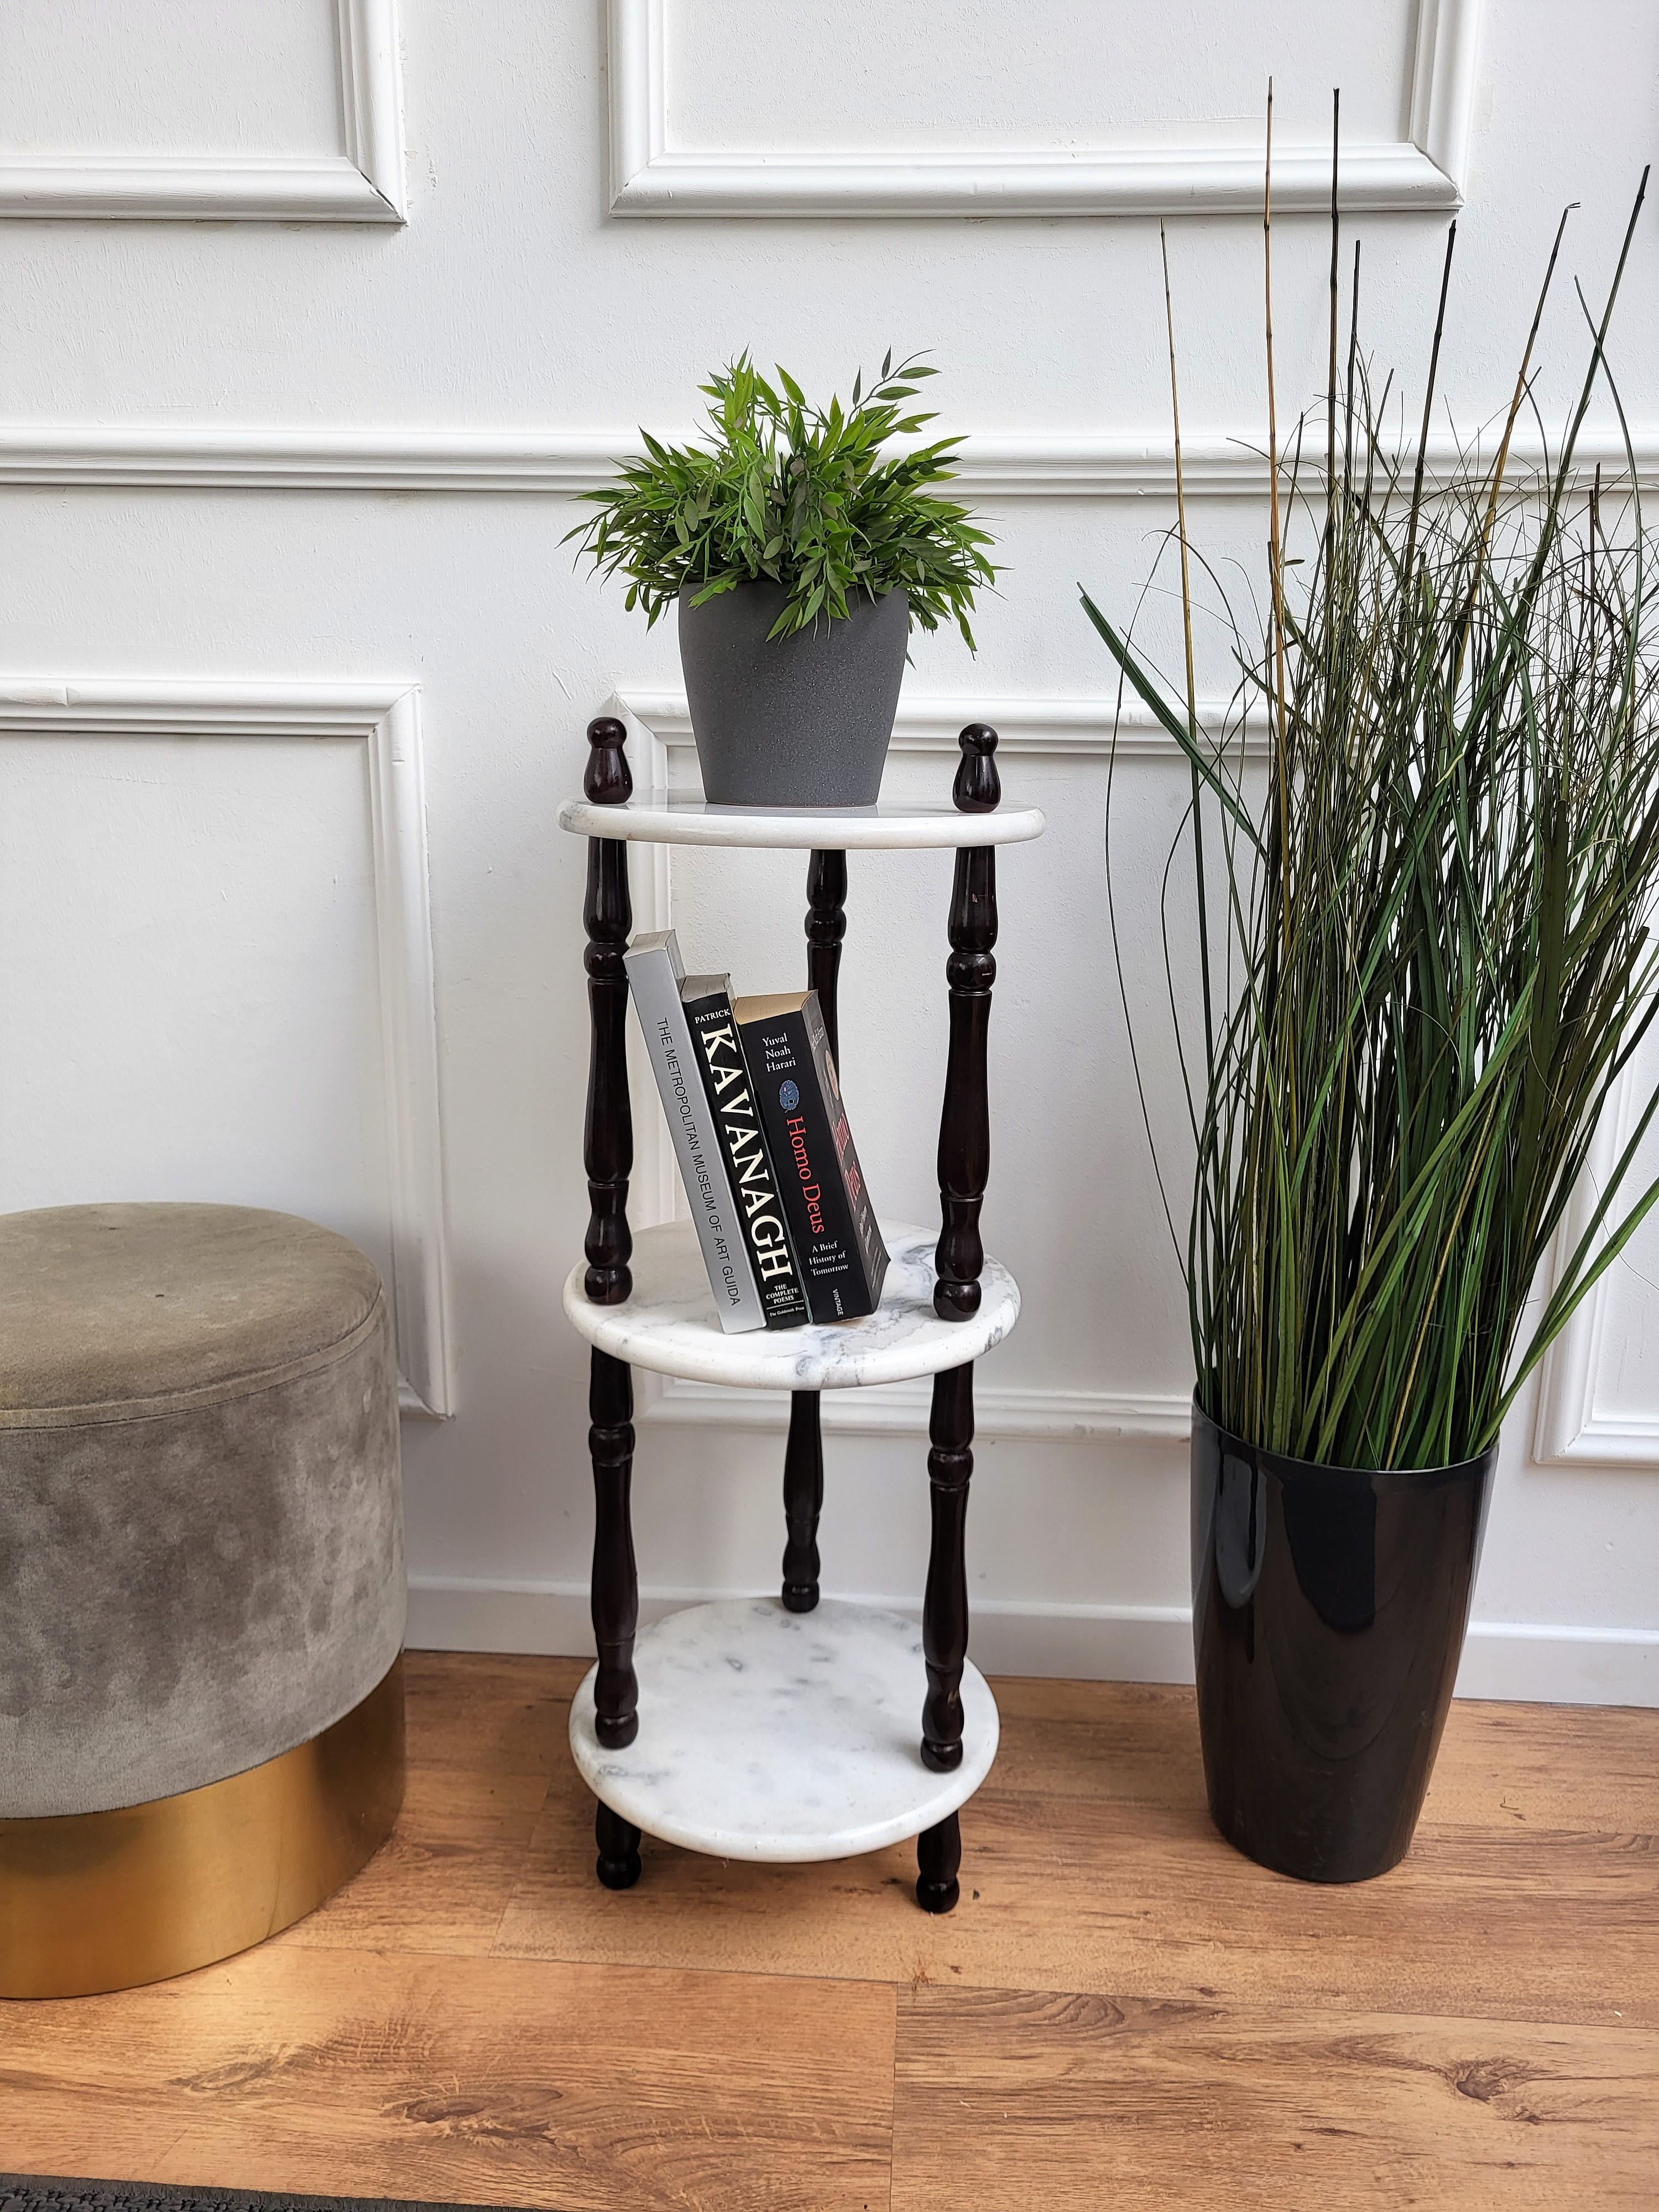 Beautiful and very elegant Italian Mid-Century Modern three tiered marble small etagere or side end table. This piece is structured around three black wooden carved columns or legs with three round shaped white carrara marble shelves or tiers.